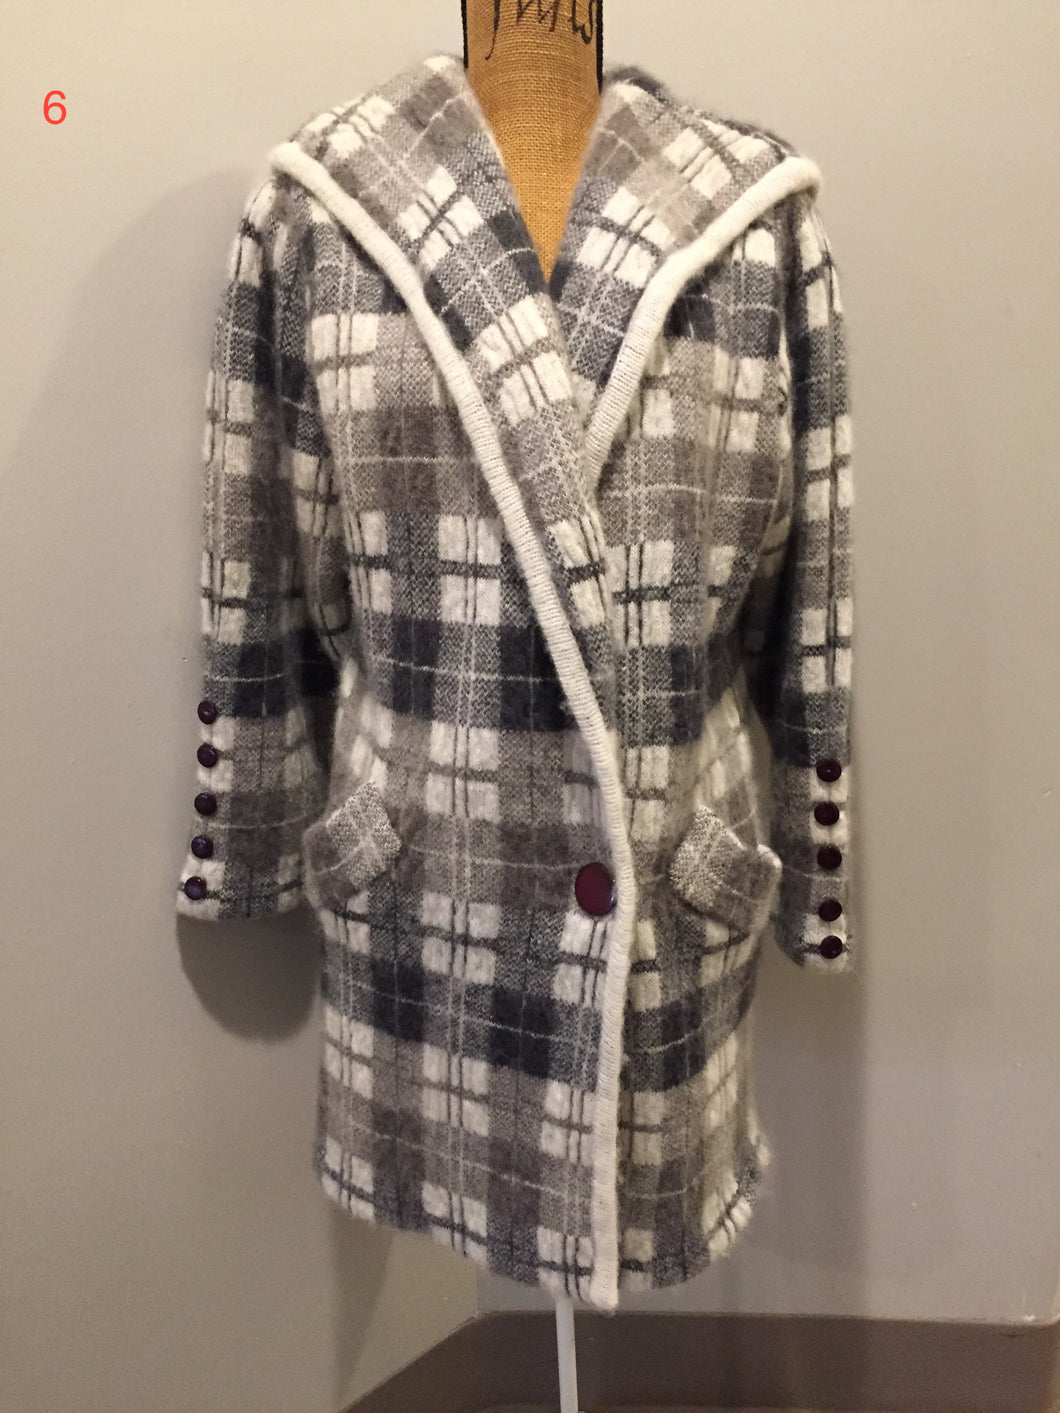 Kingspier Vintage - L.B. International Grey and white plaid mohair sweater coat with button closure, welt pockets and a shawl collar